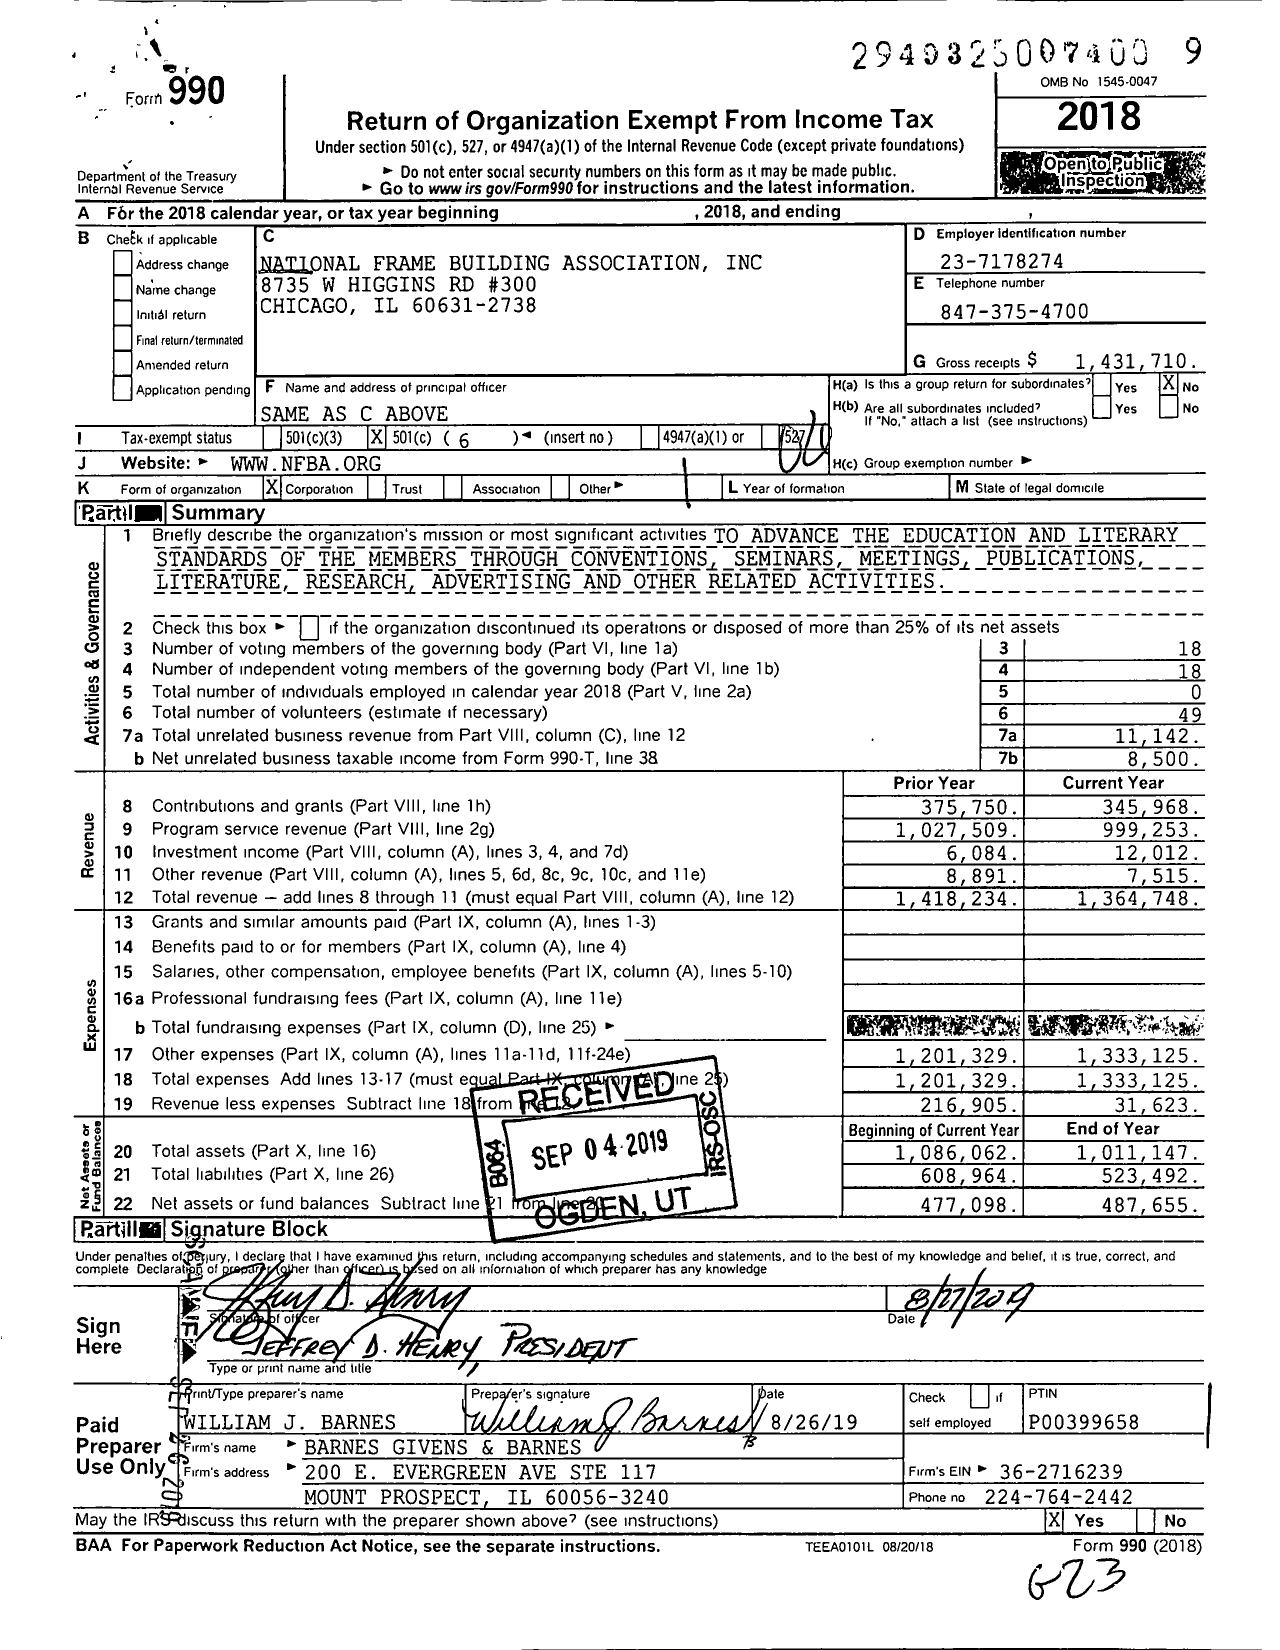 Image of first page of 2018 Form 990O for National Frame Building Association (NFBA)